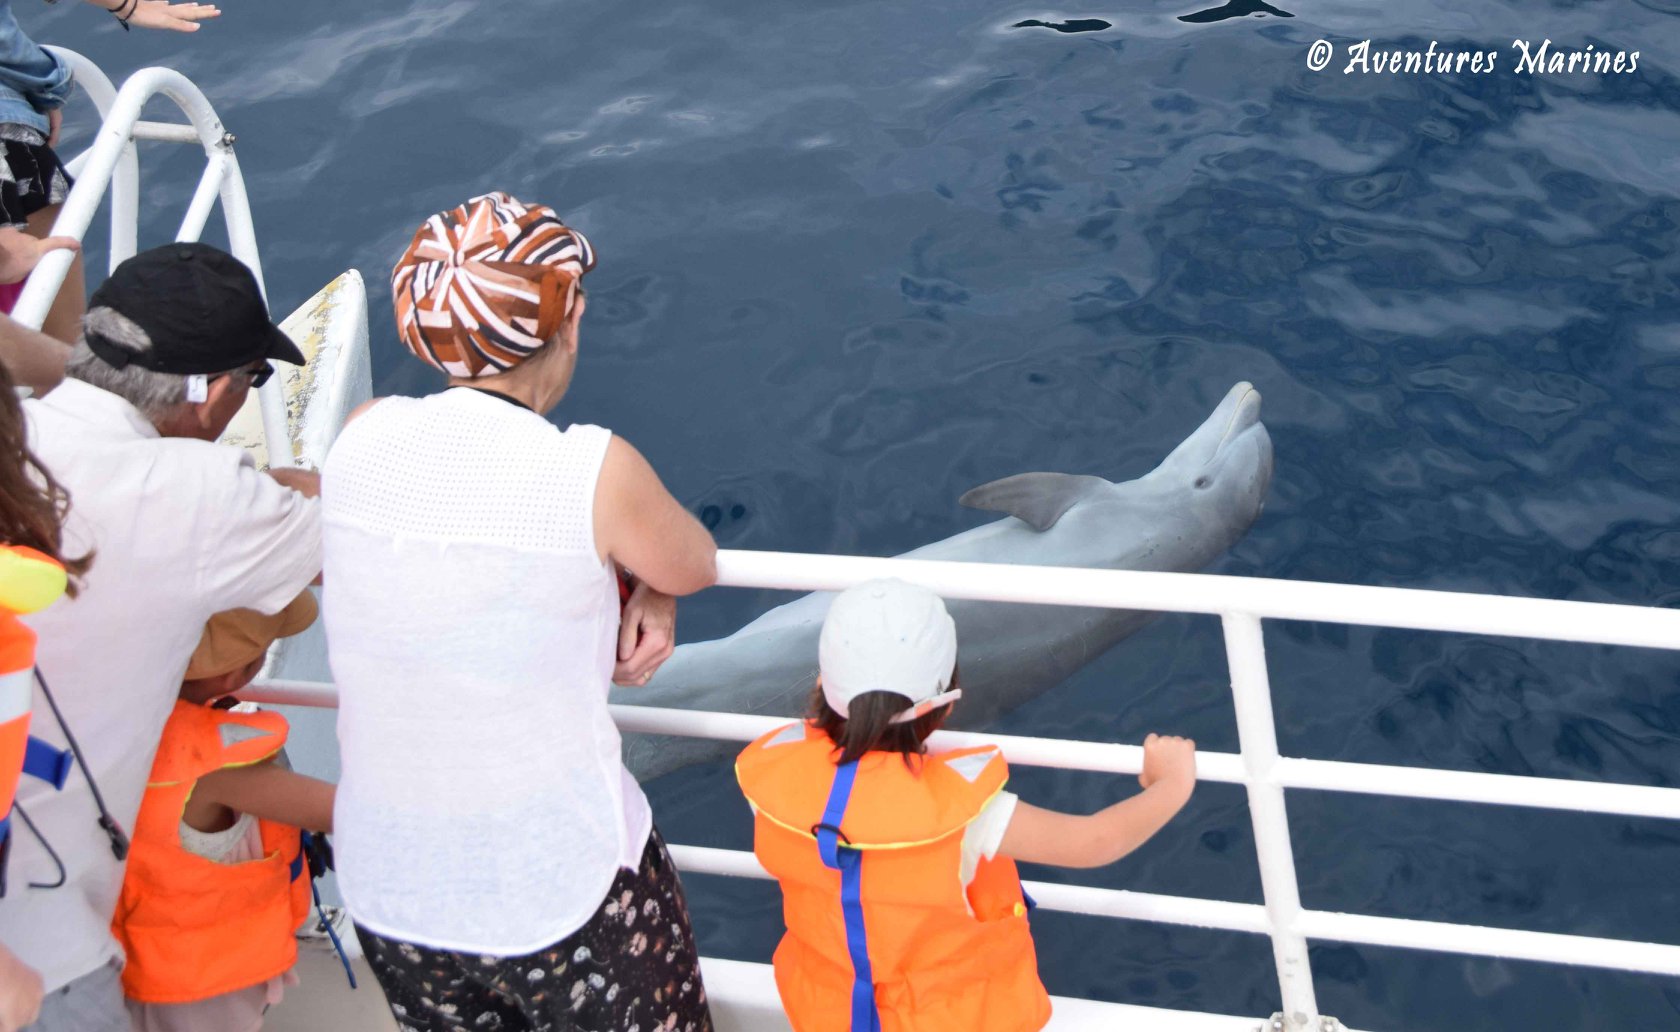 Activité Aventures Marines offer Dolphin, Sperm whale and Whale watching. image